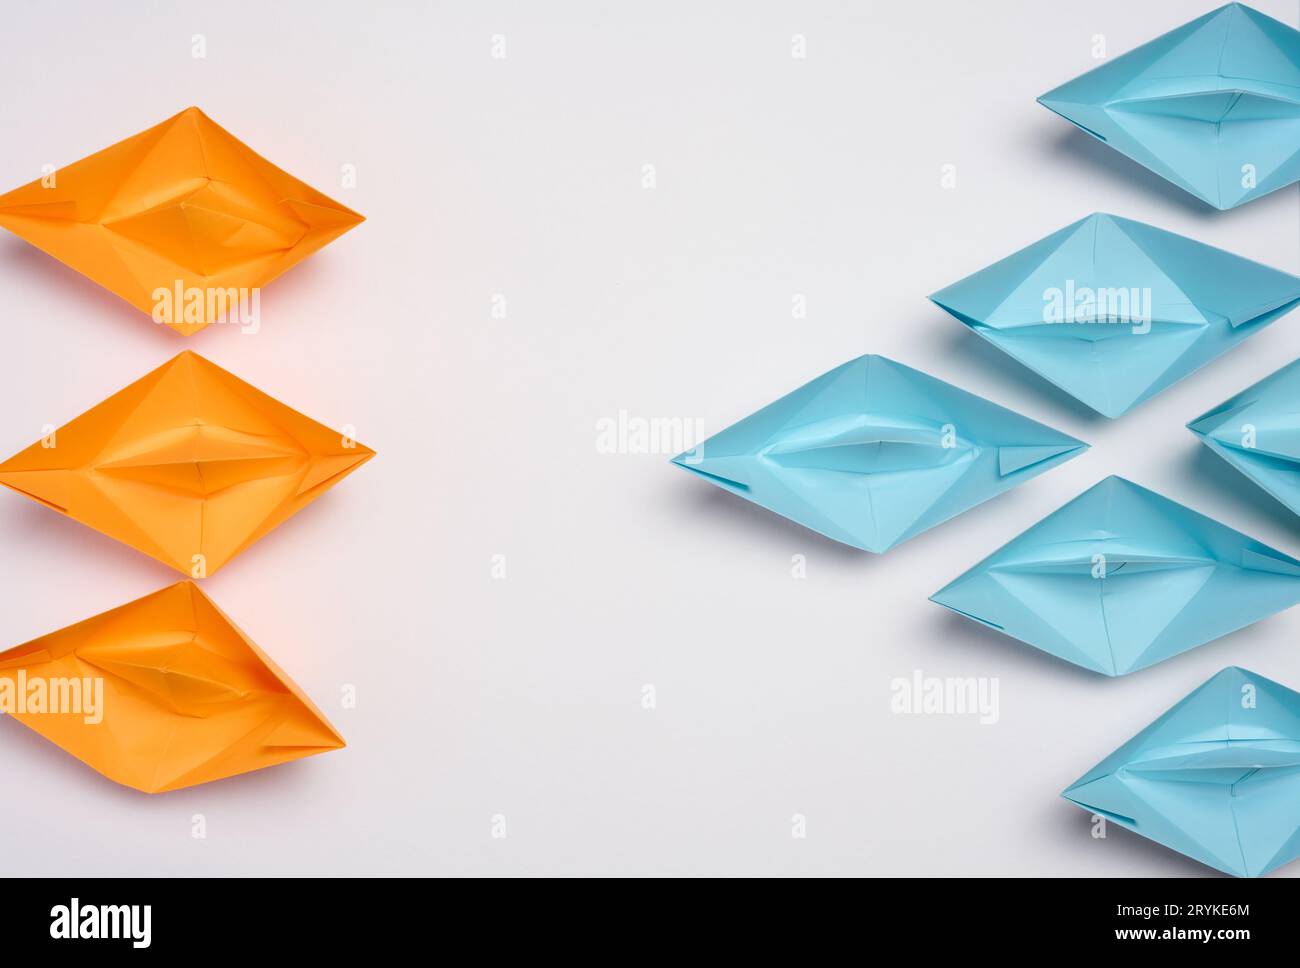 Two groups of paper boats facing each other, a concept of confrontation, top view Stock Photo